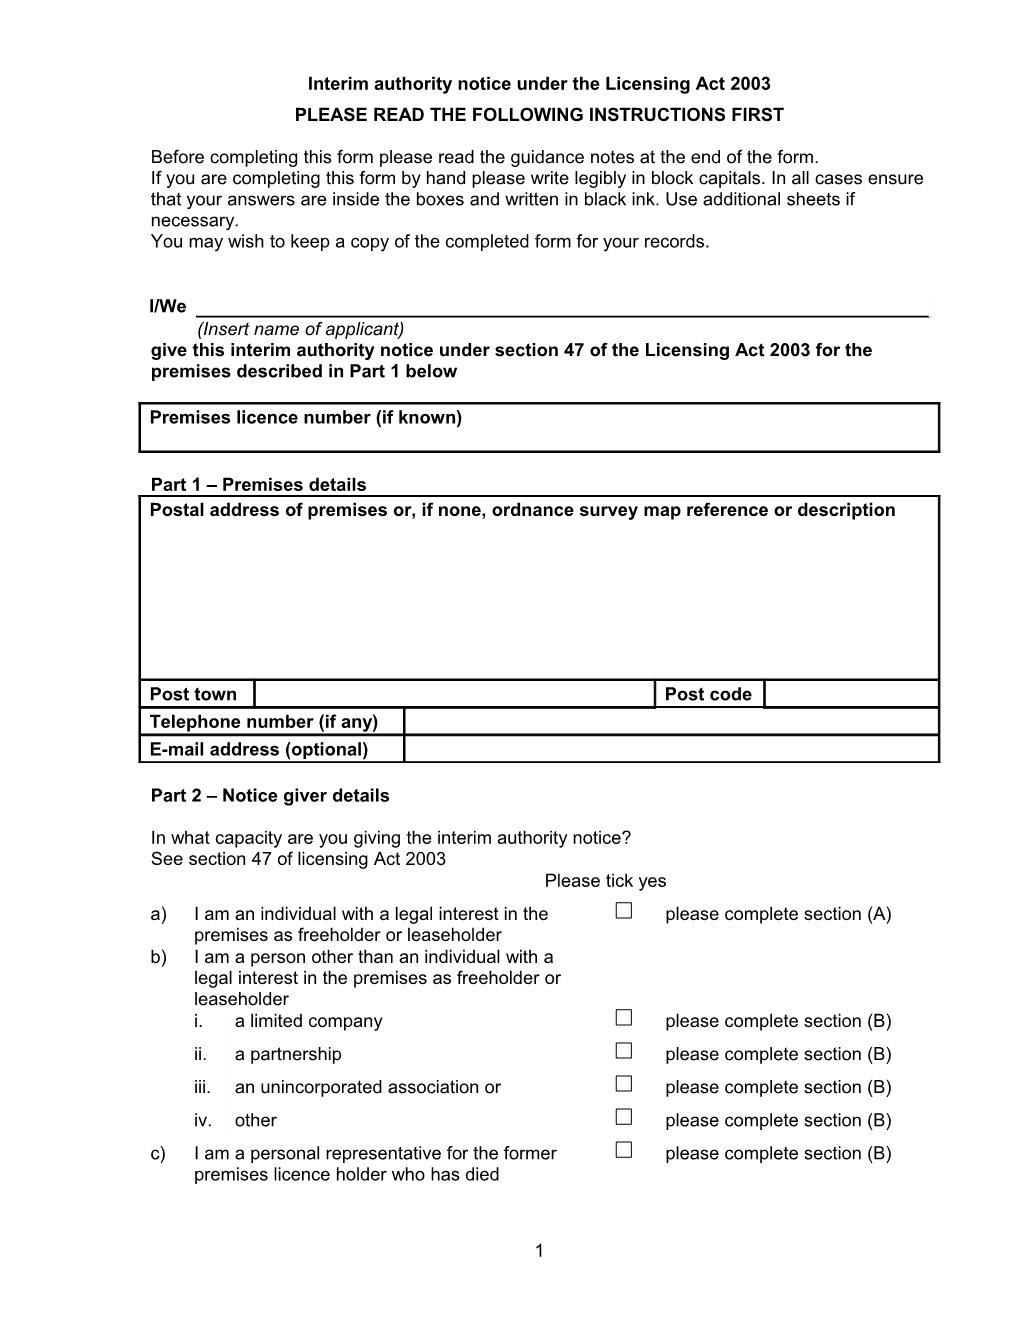 Interim Authority Notice Under the Licensing Act 2003 (Updated 1 January 2011)